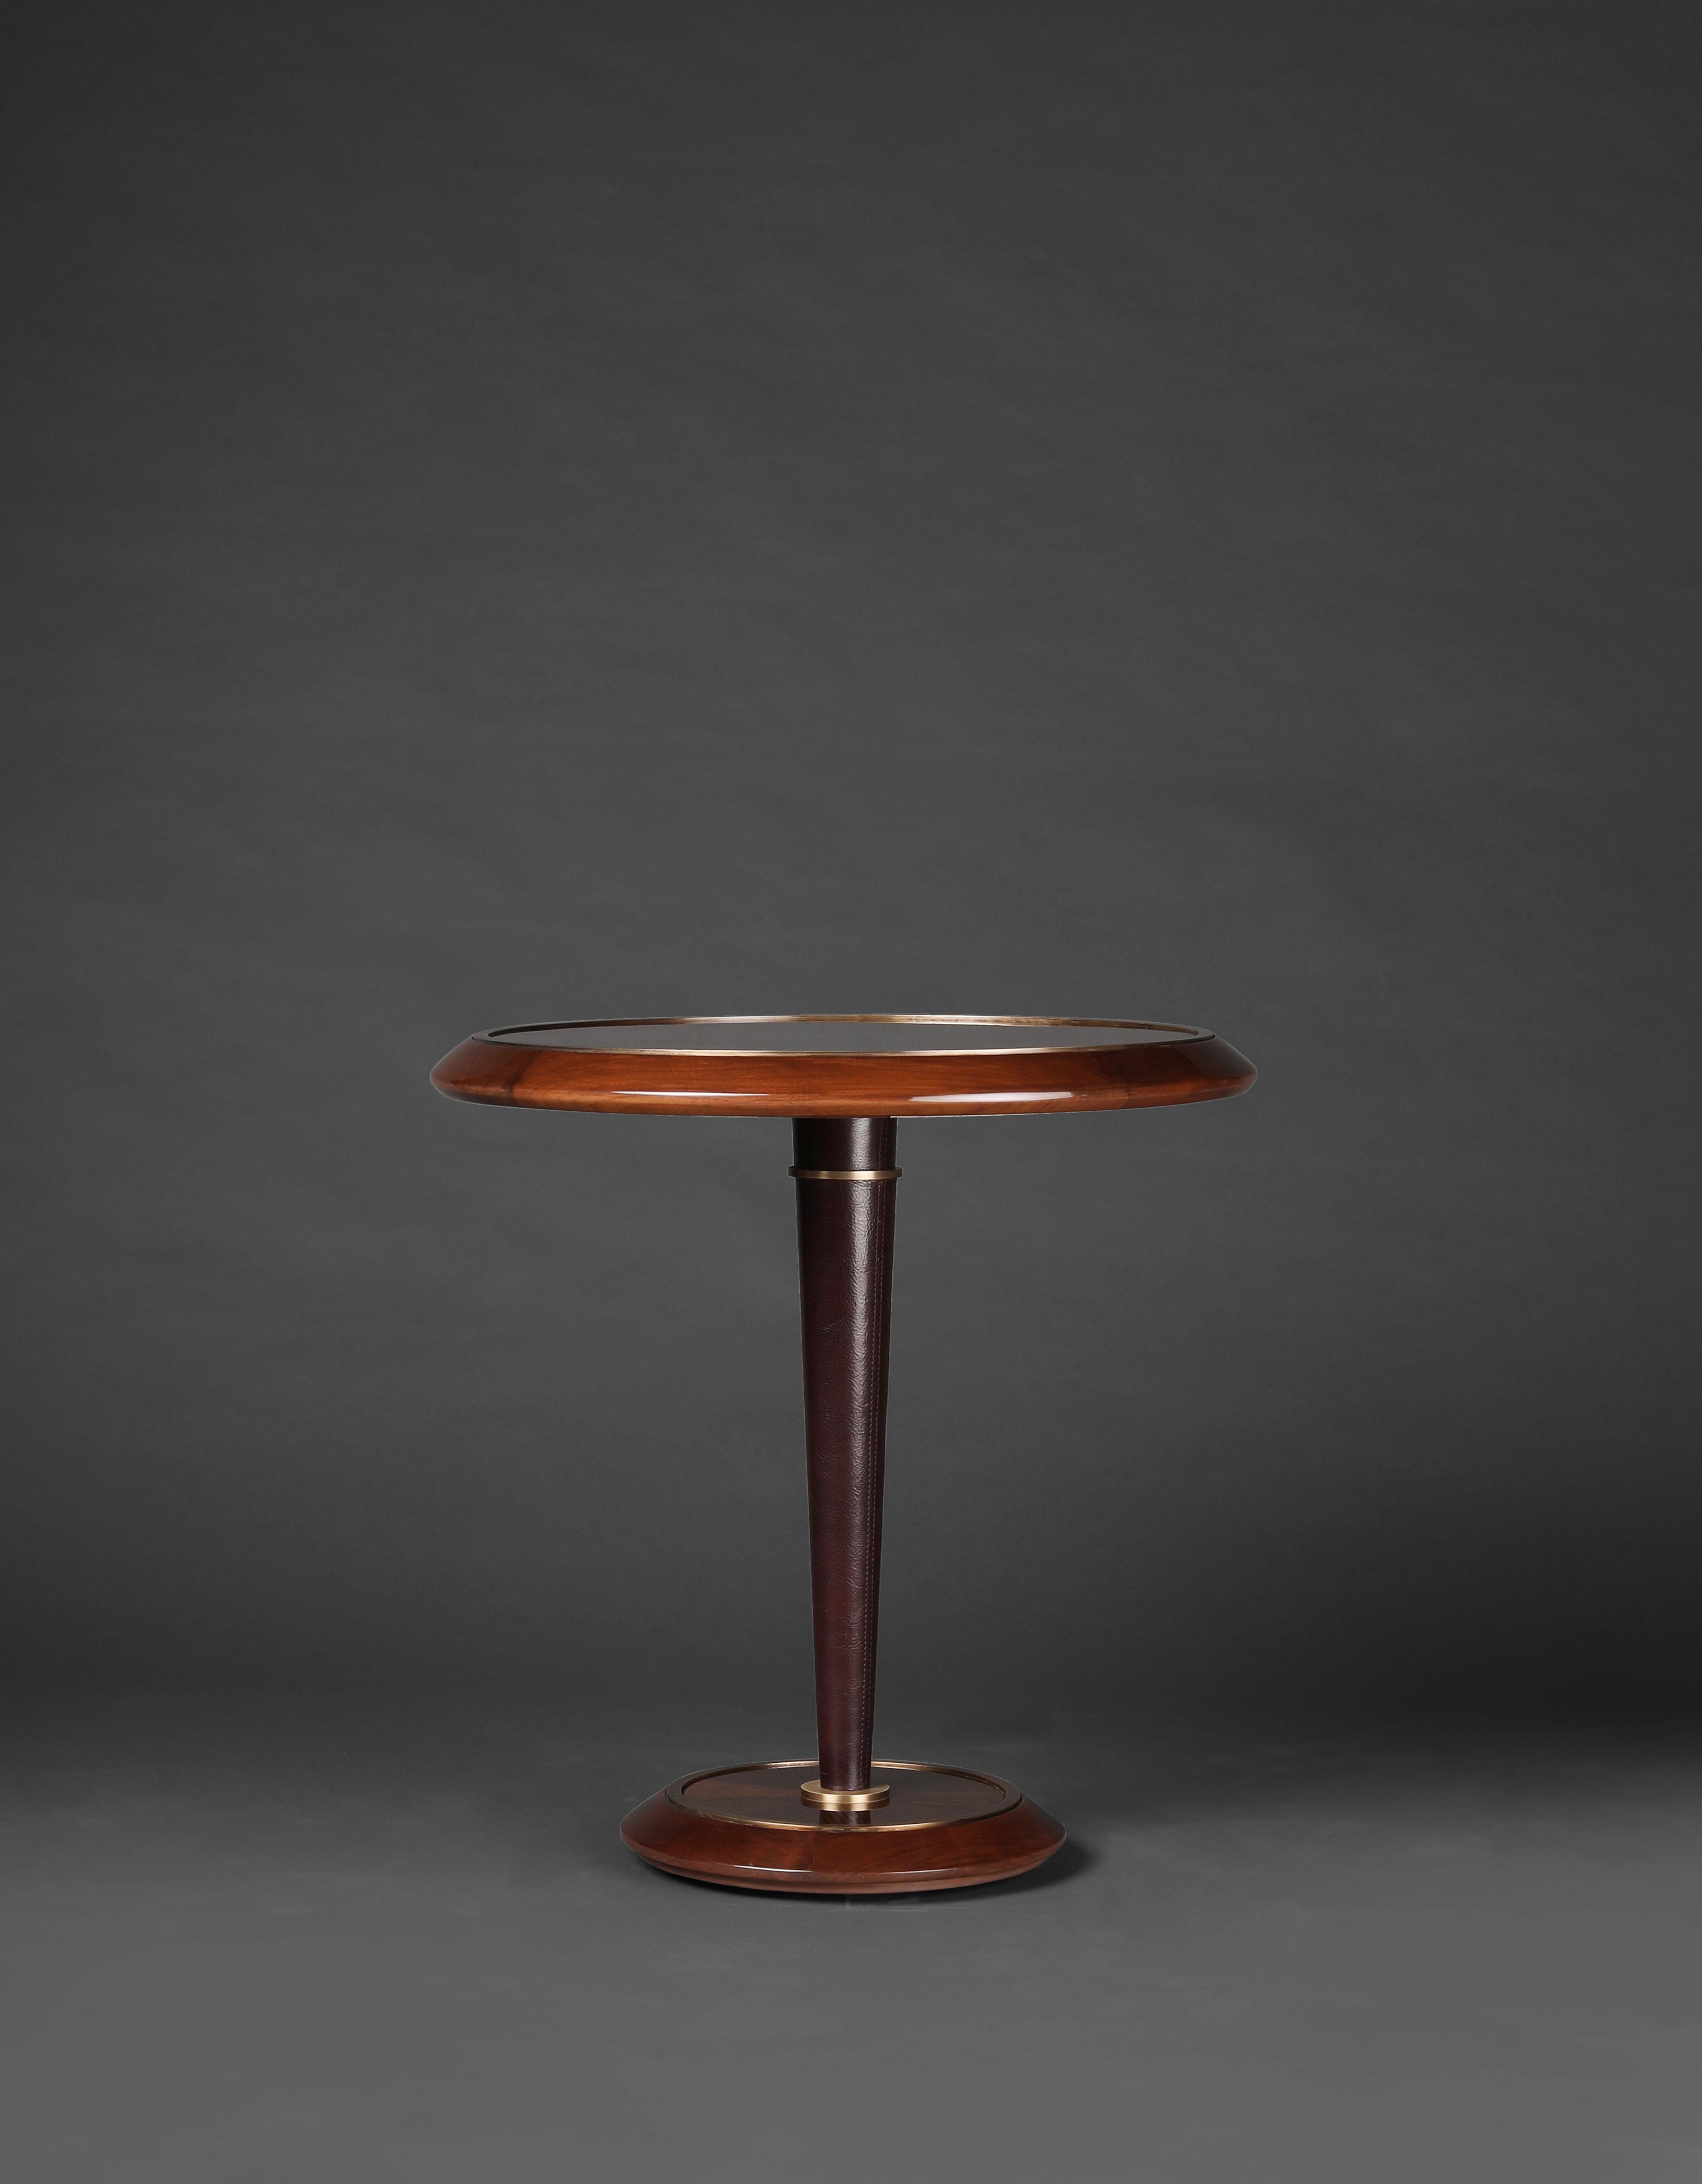 Leather pedestal leg sura side table by Madheke
Dimensions: Ø 55 x H 55.5 cm
Materials: Leather, veneer, metal

Marquetry set in a contemporary metal trim with a leather pedestal leg.

Reflecting the finest in craftsmanship, innovation and heritage,